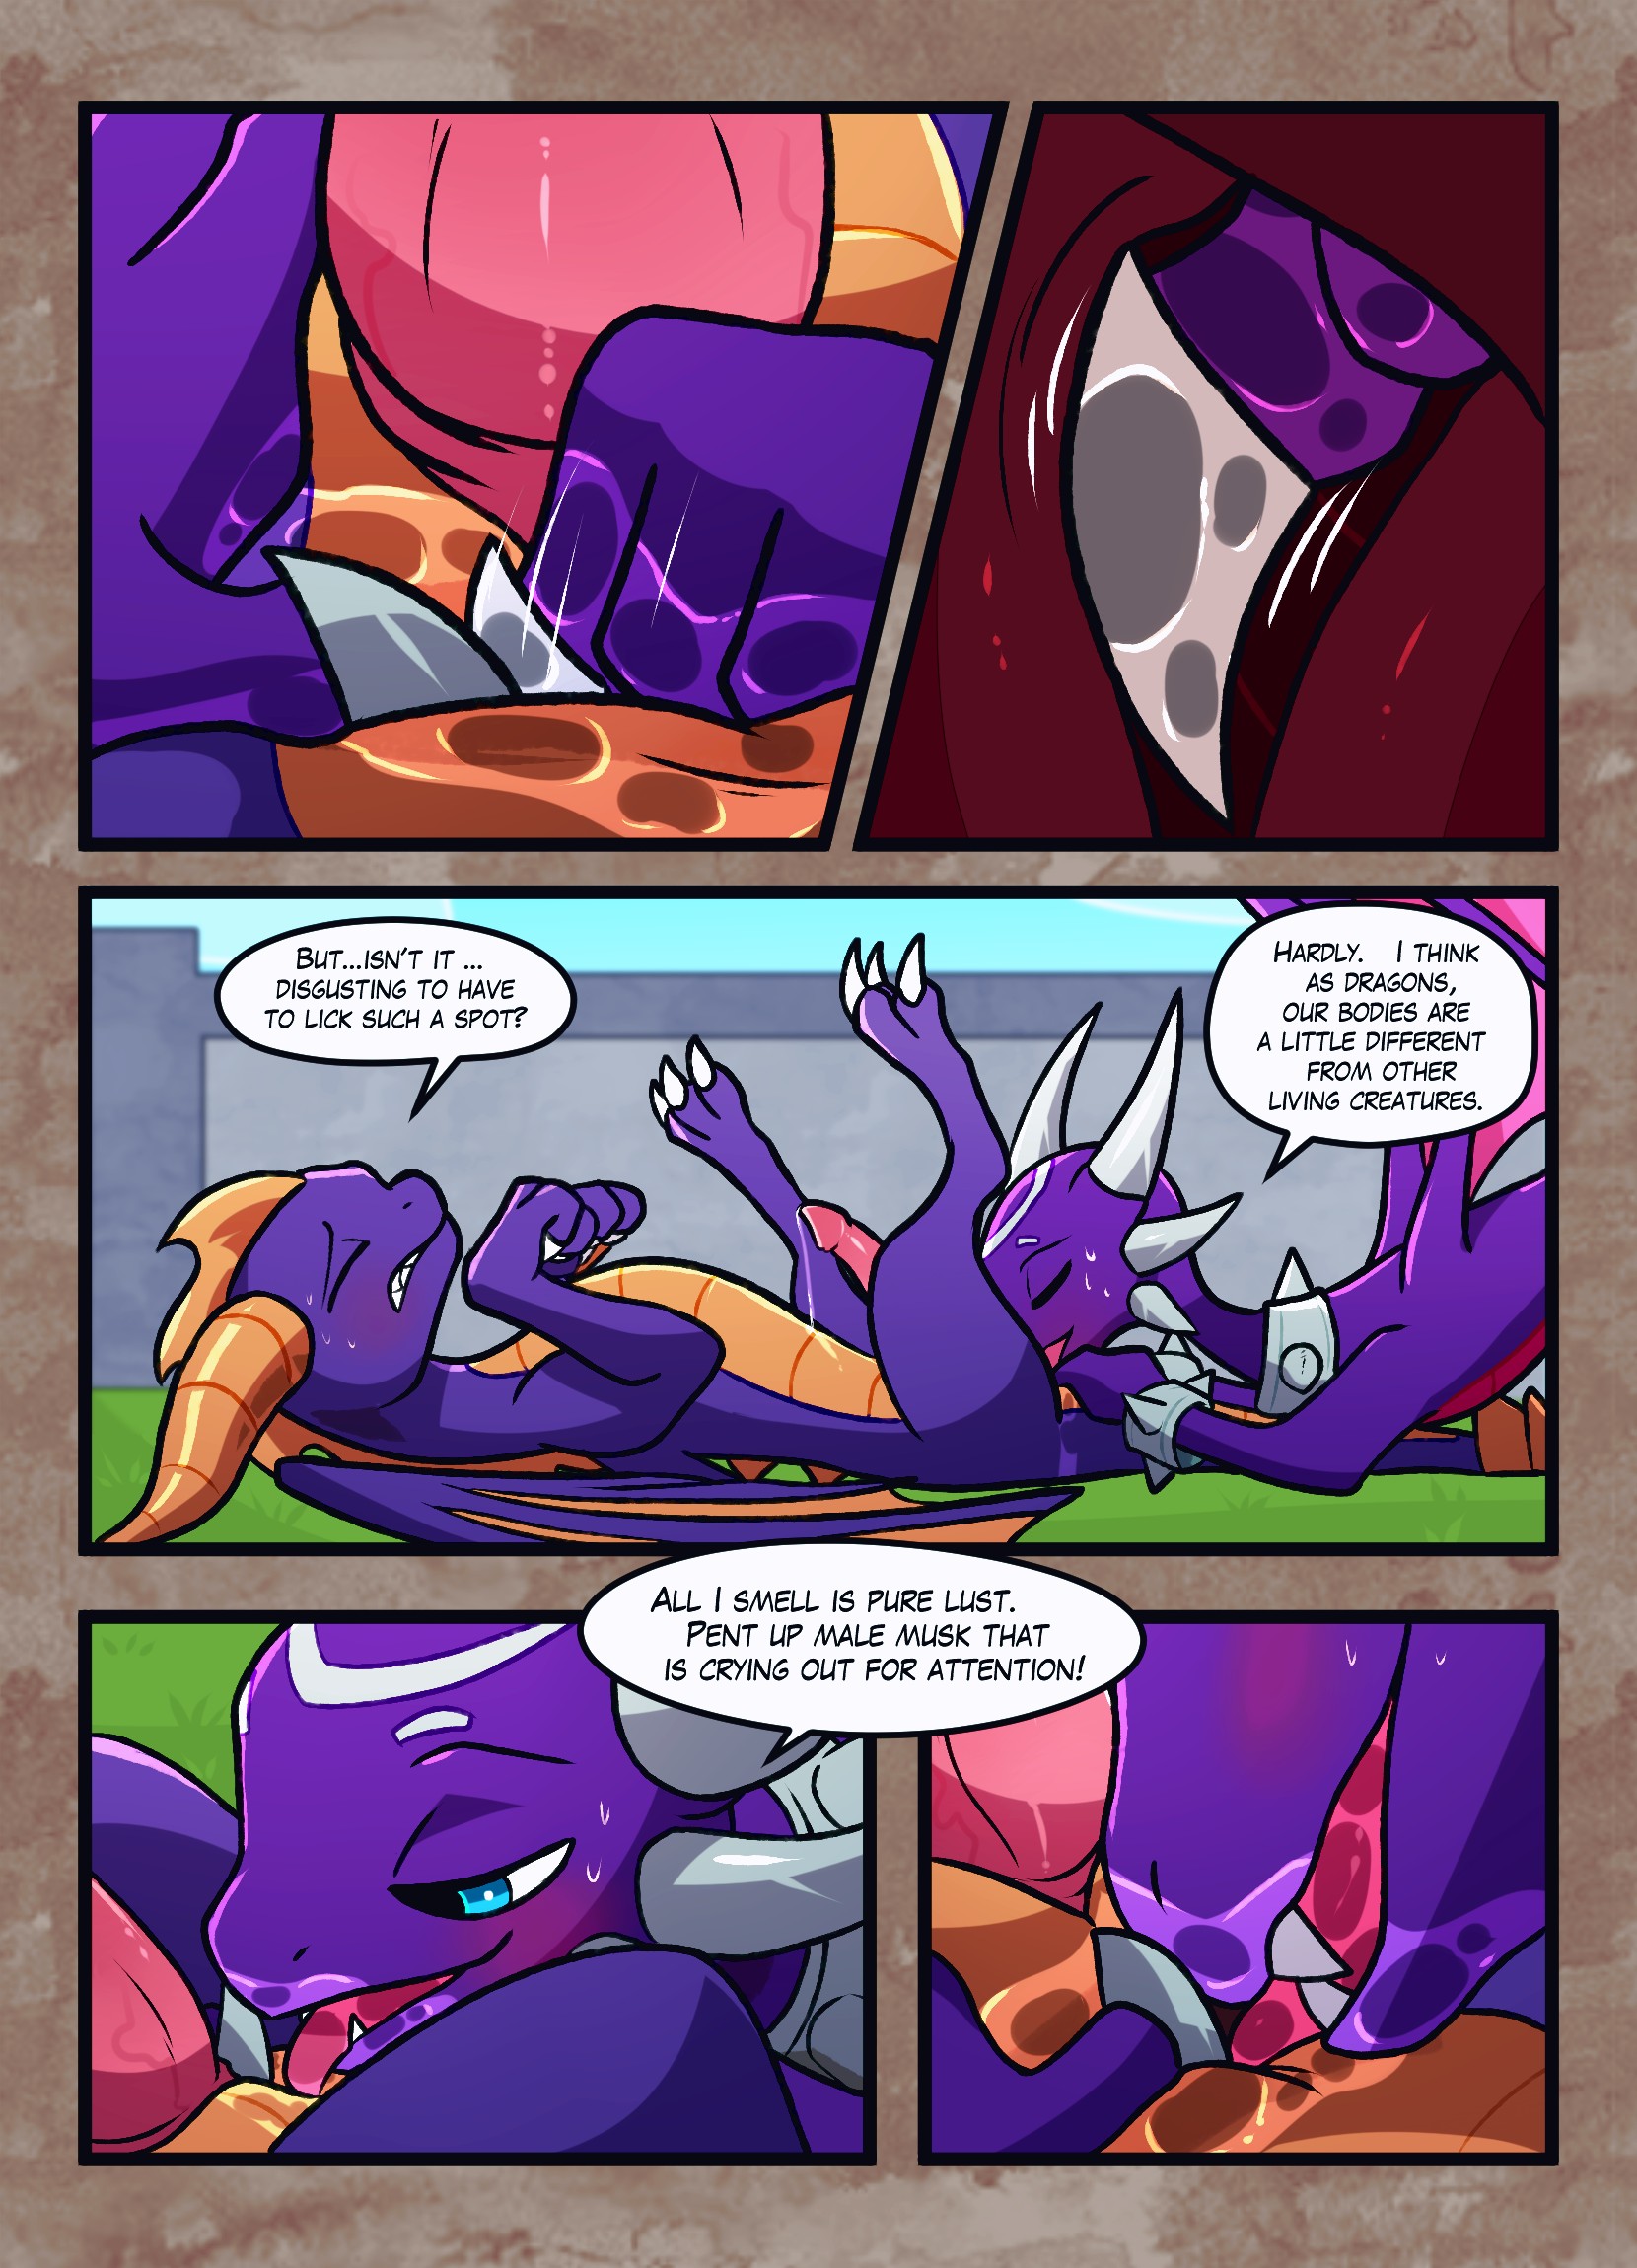 A Friend In Need porn comic page 016